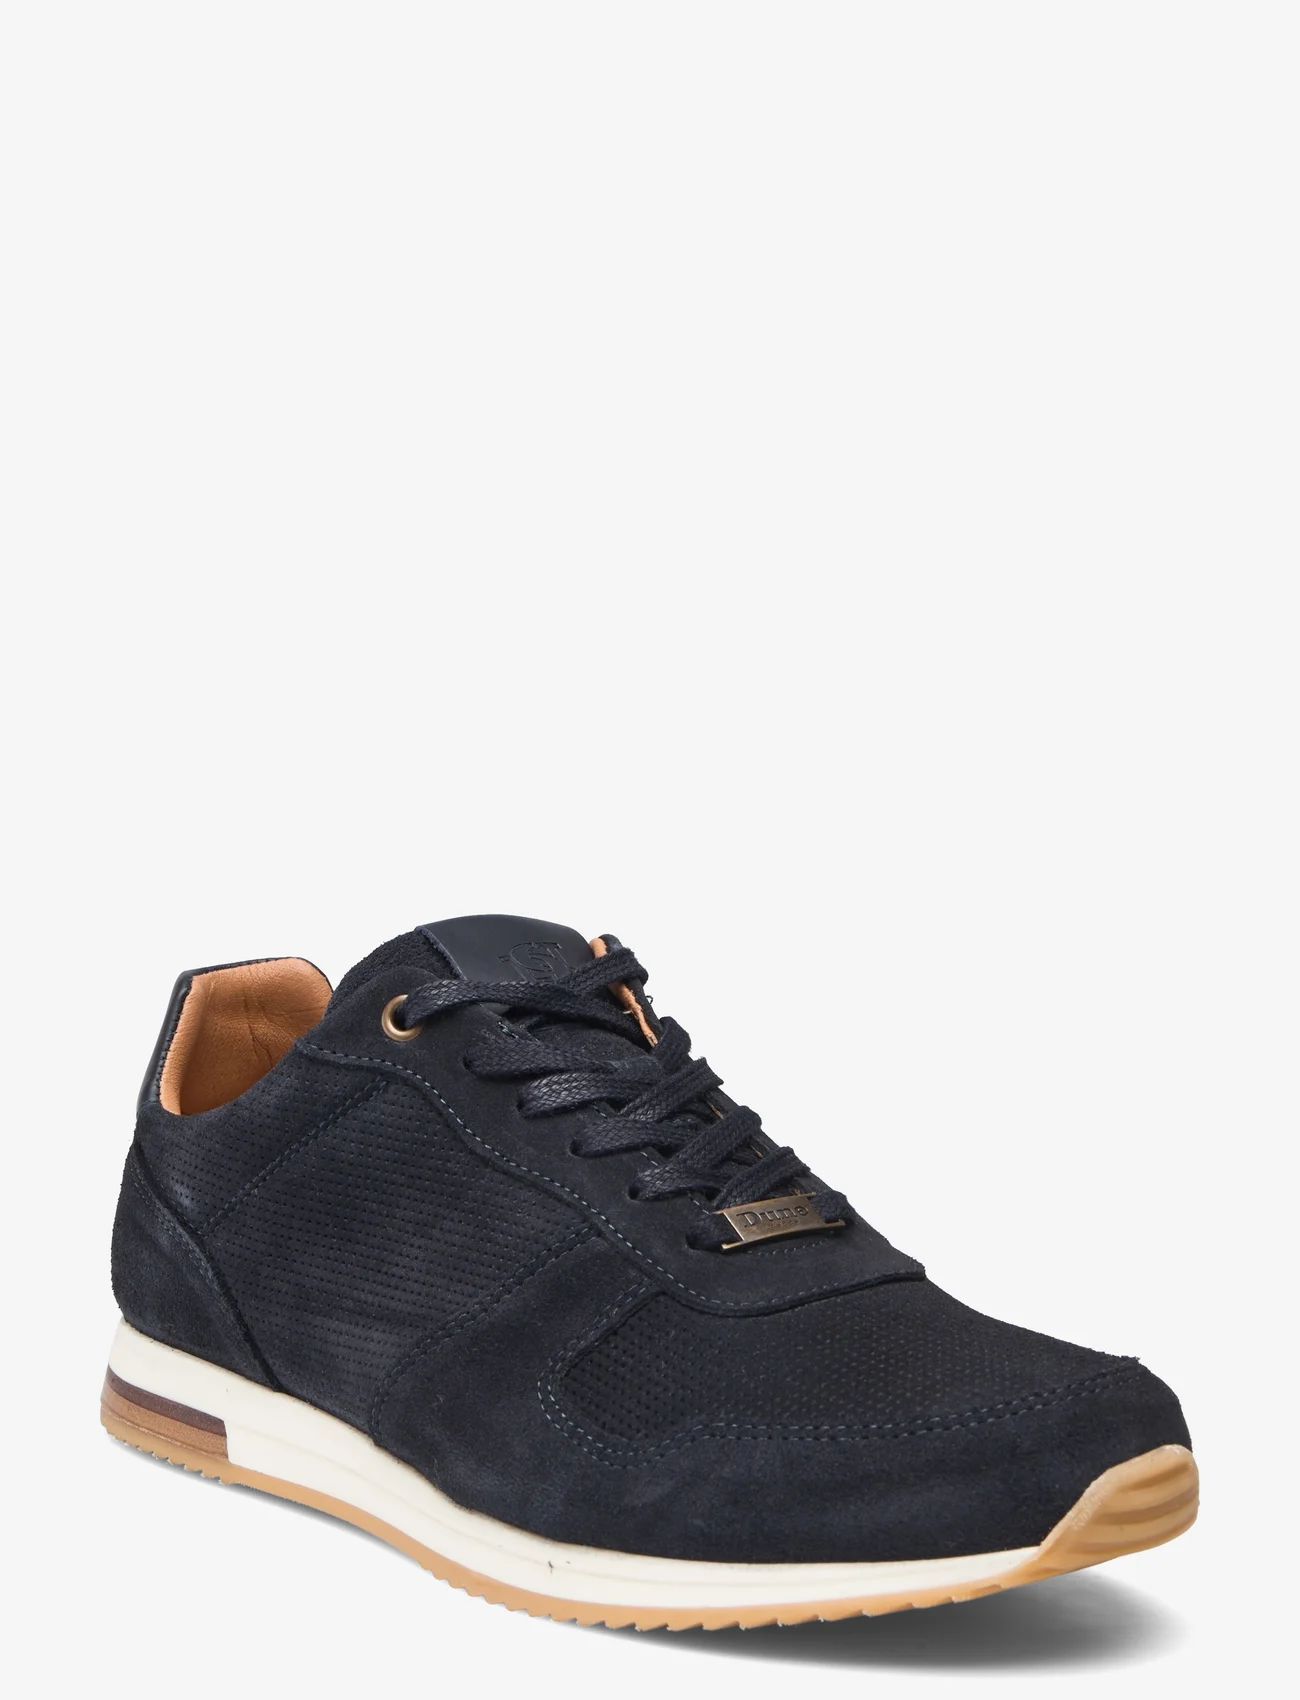 Dune London - trilogy - lave sneakers - navy - 0